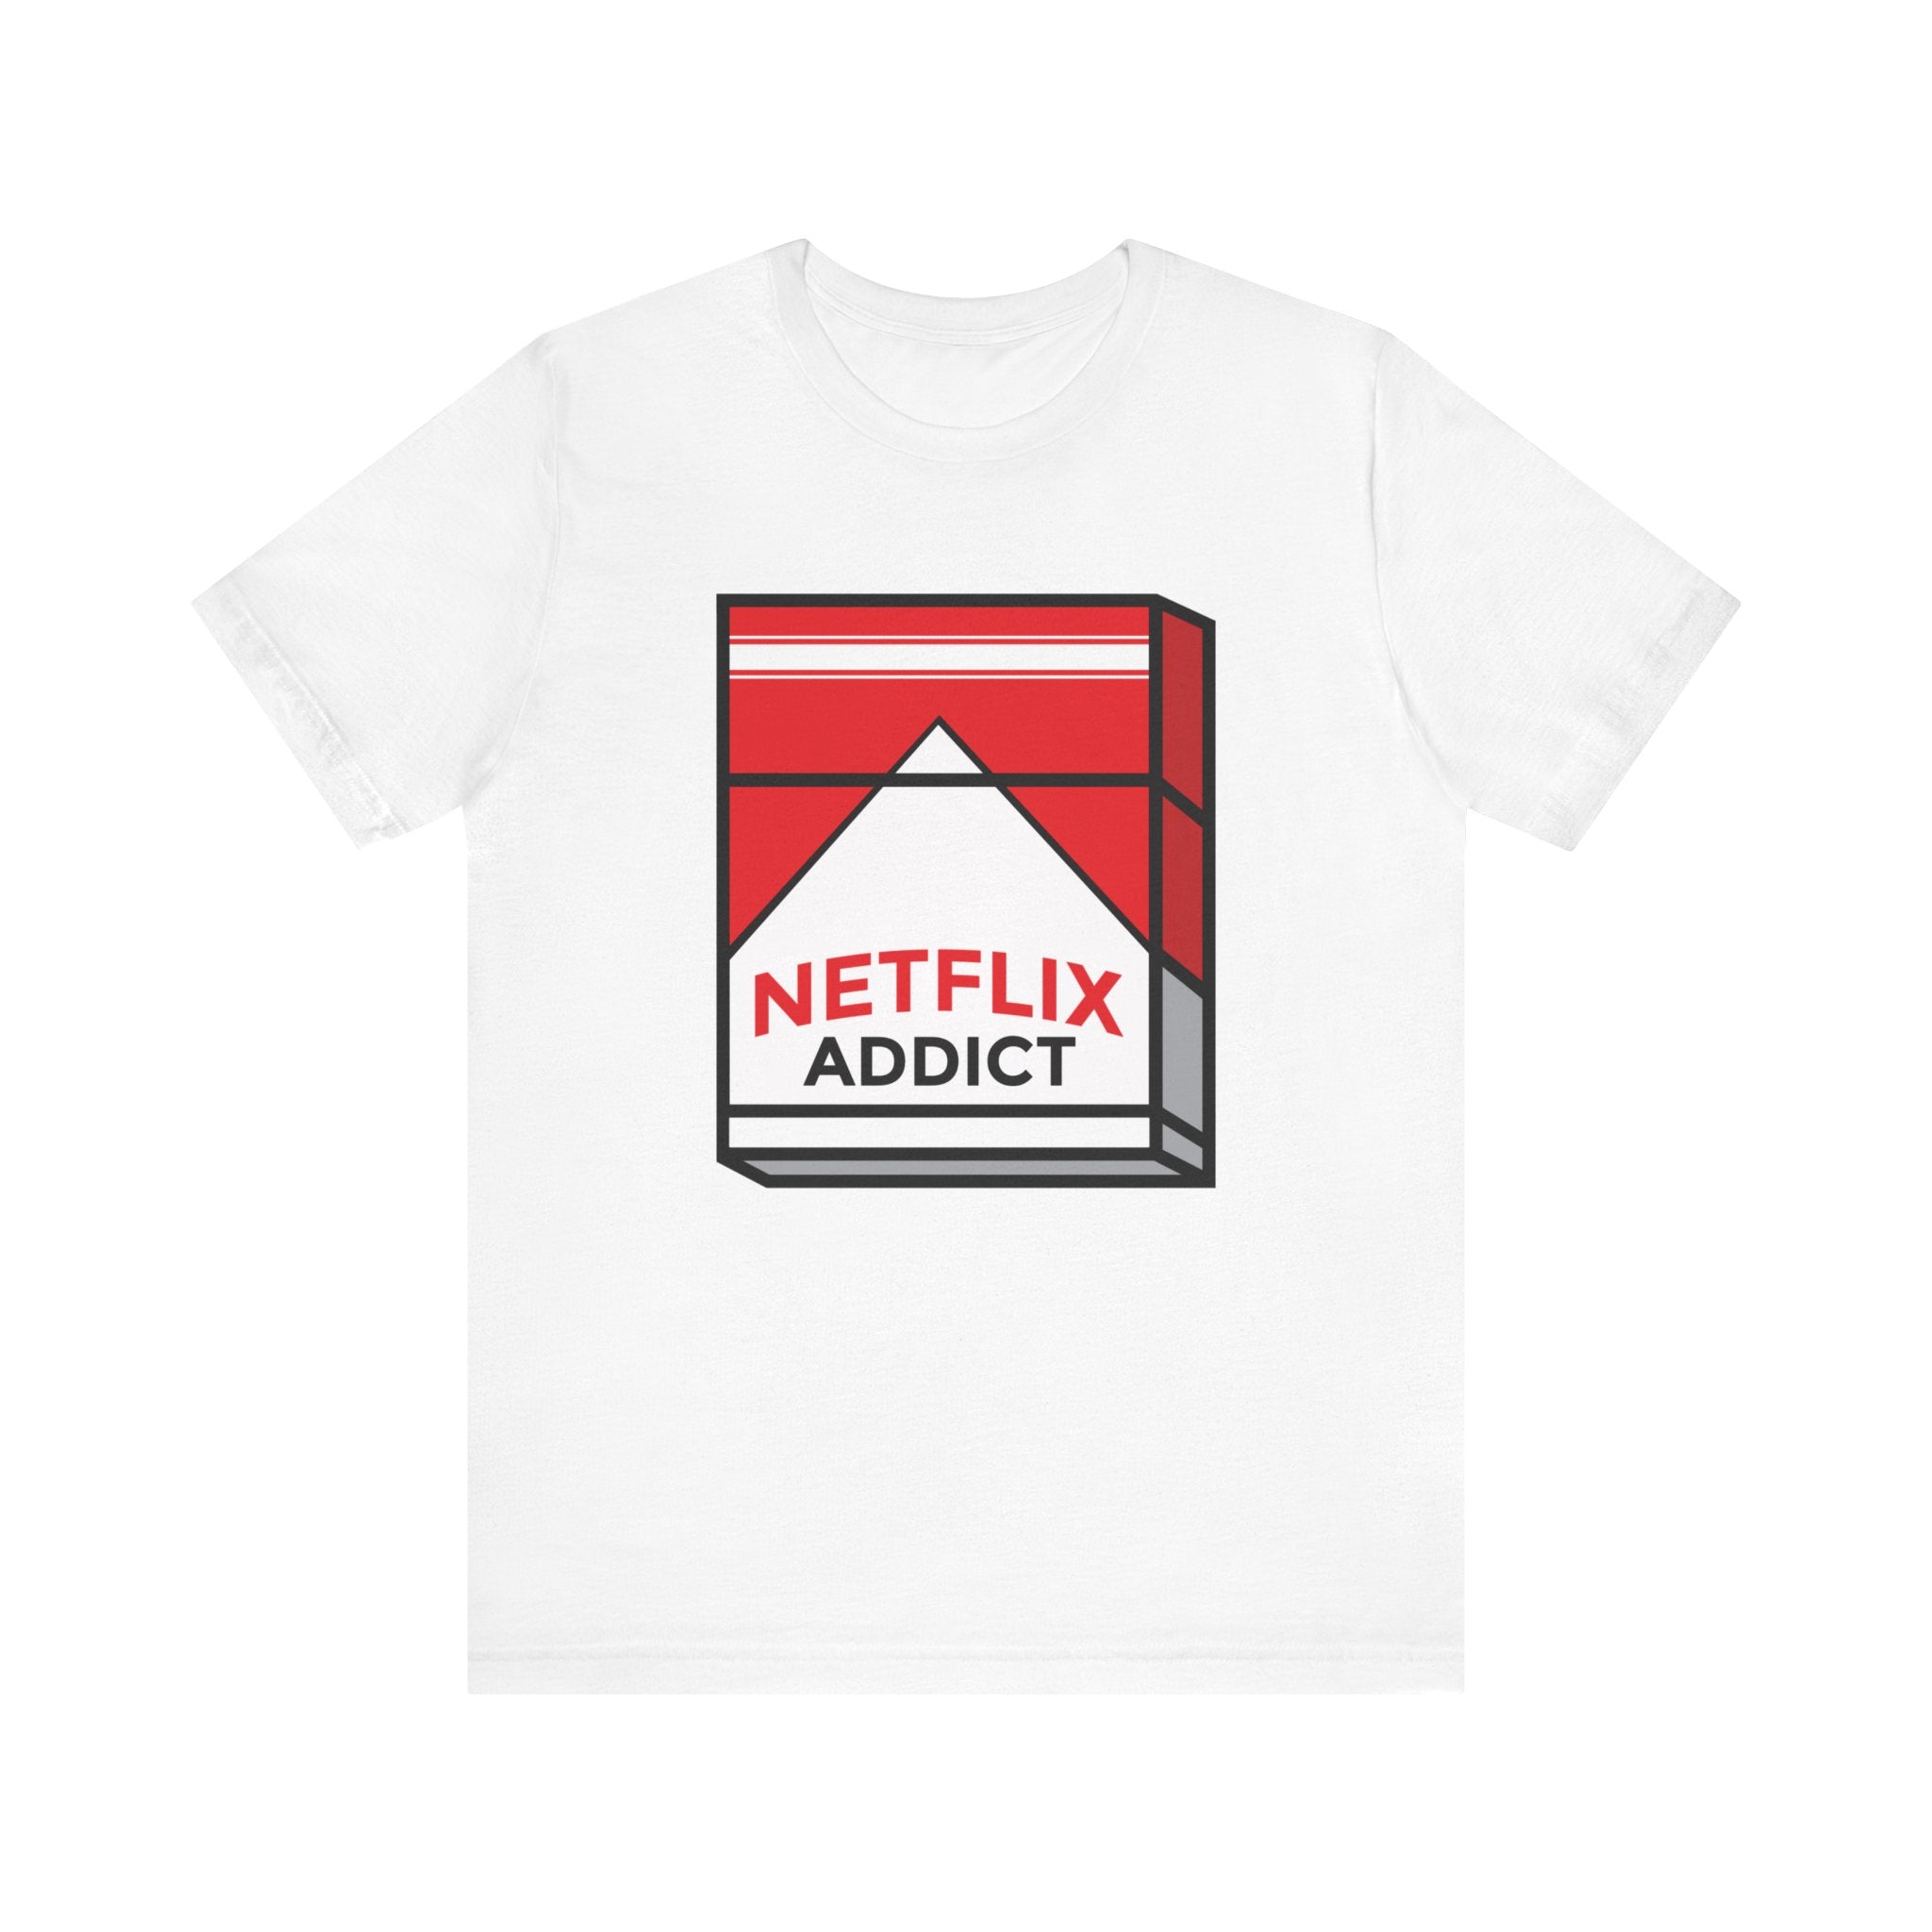 Unisex jersey tee featuring a graphic of a red and white **Netflix Addict** logo altered to read "Netflix addict" in a triangular warning sign design, perfect for binge-watching sessions.